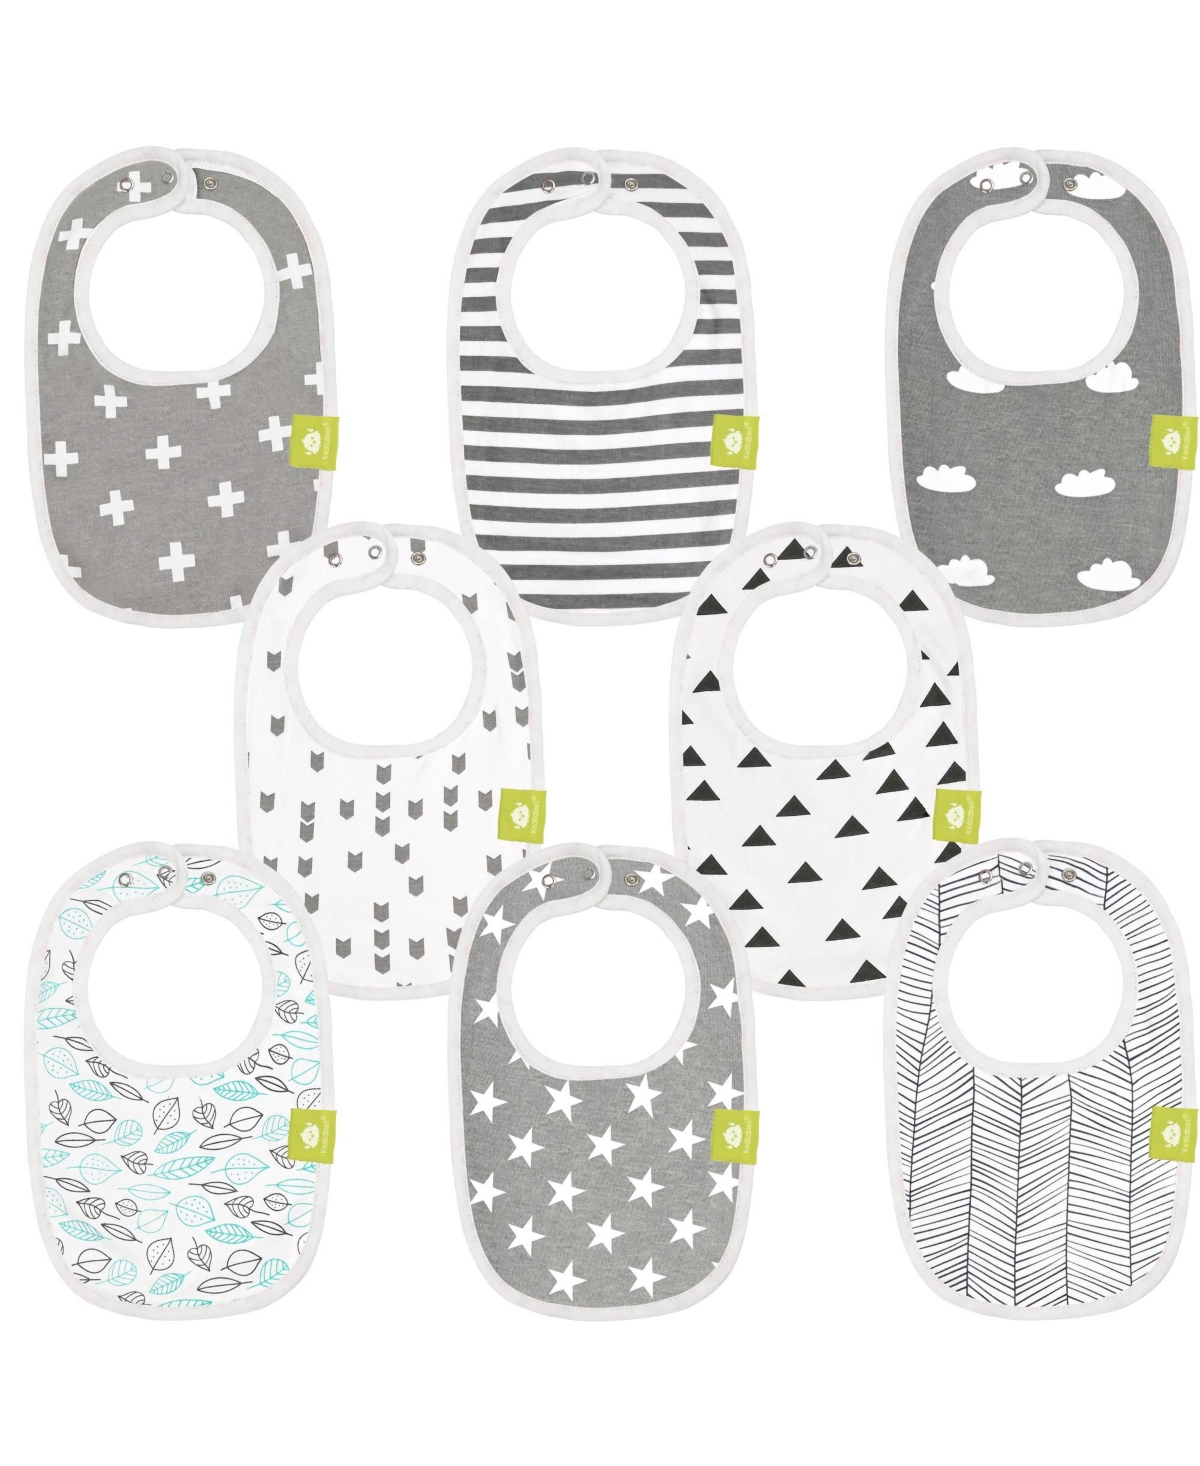 Keababies 8pk Organic Baby Bibs For Boy, Baby Drool Bib For Baby Boys And Girls, Infant Teething Bibs In Grayscape